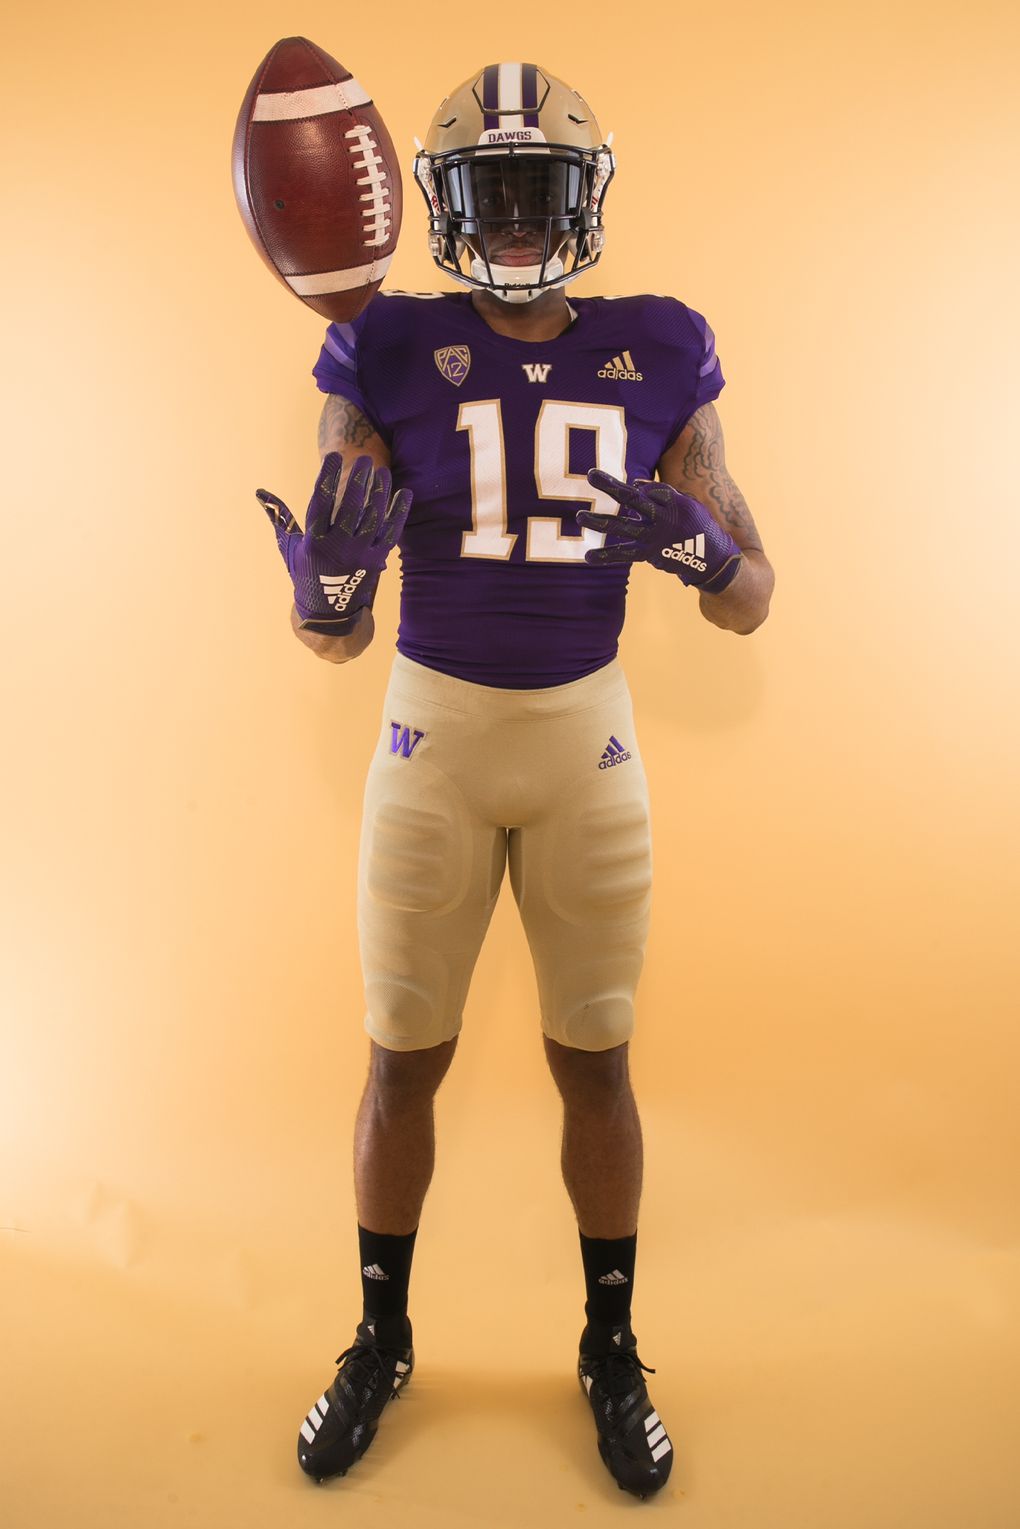 Check out UW Huskies' new Adidas 